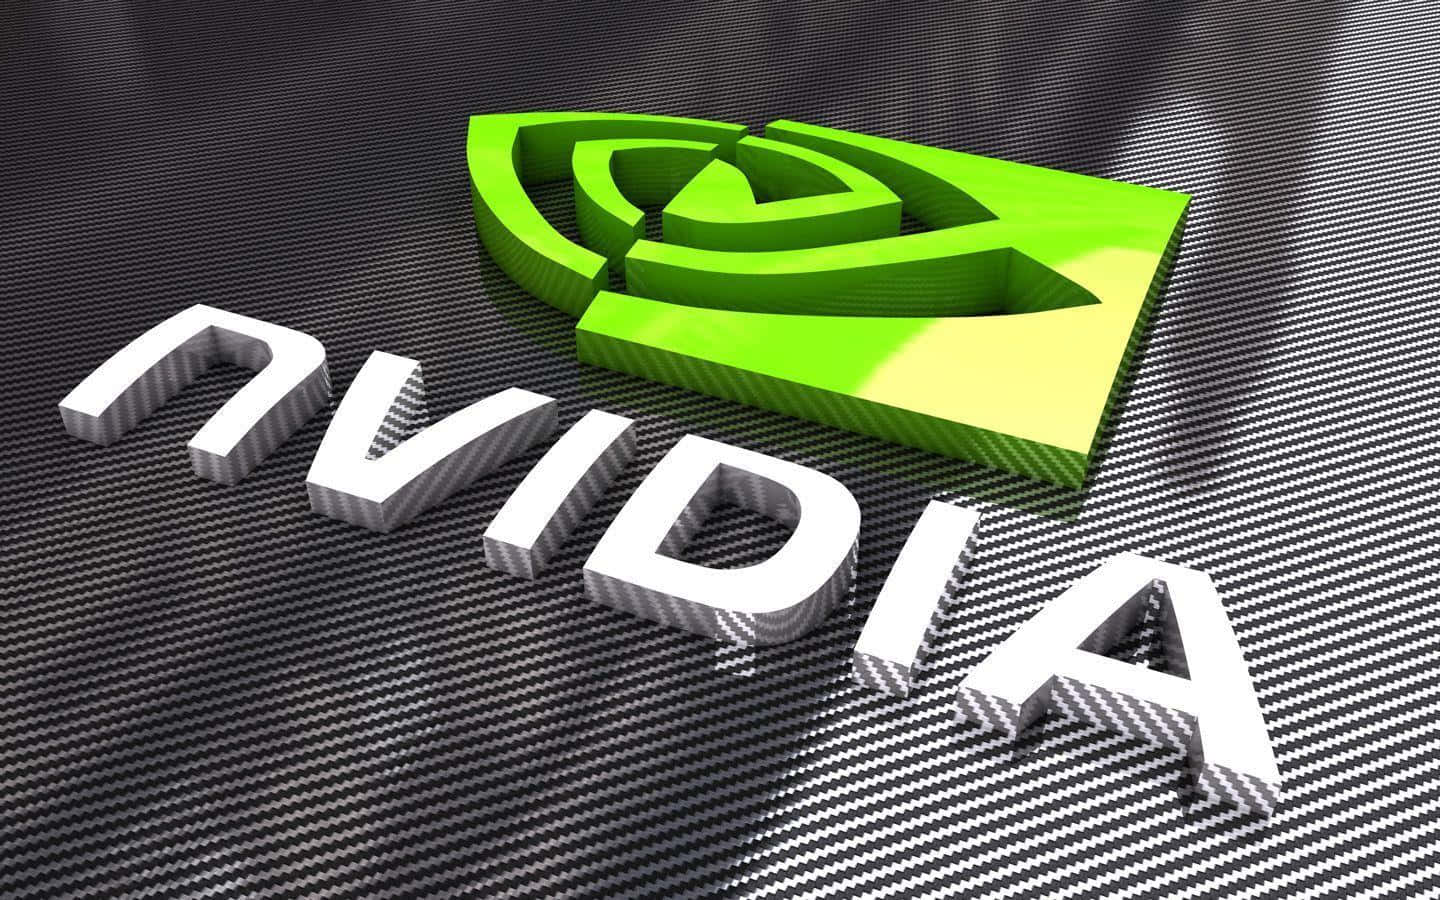 An image of an NVIDIA logo on a vibrant green background